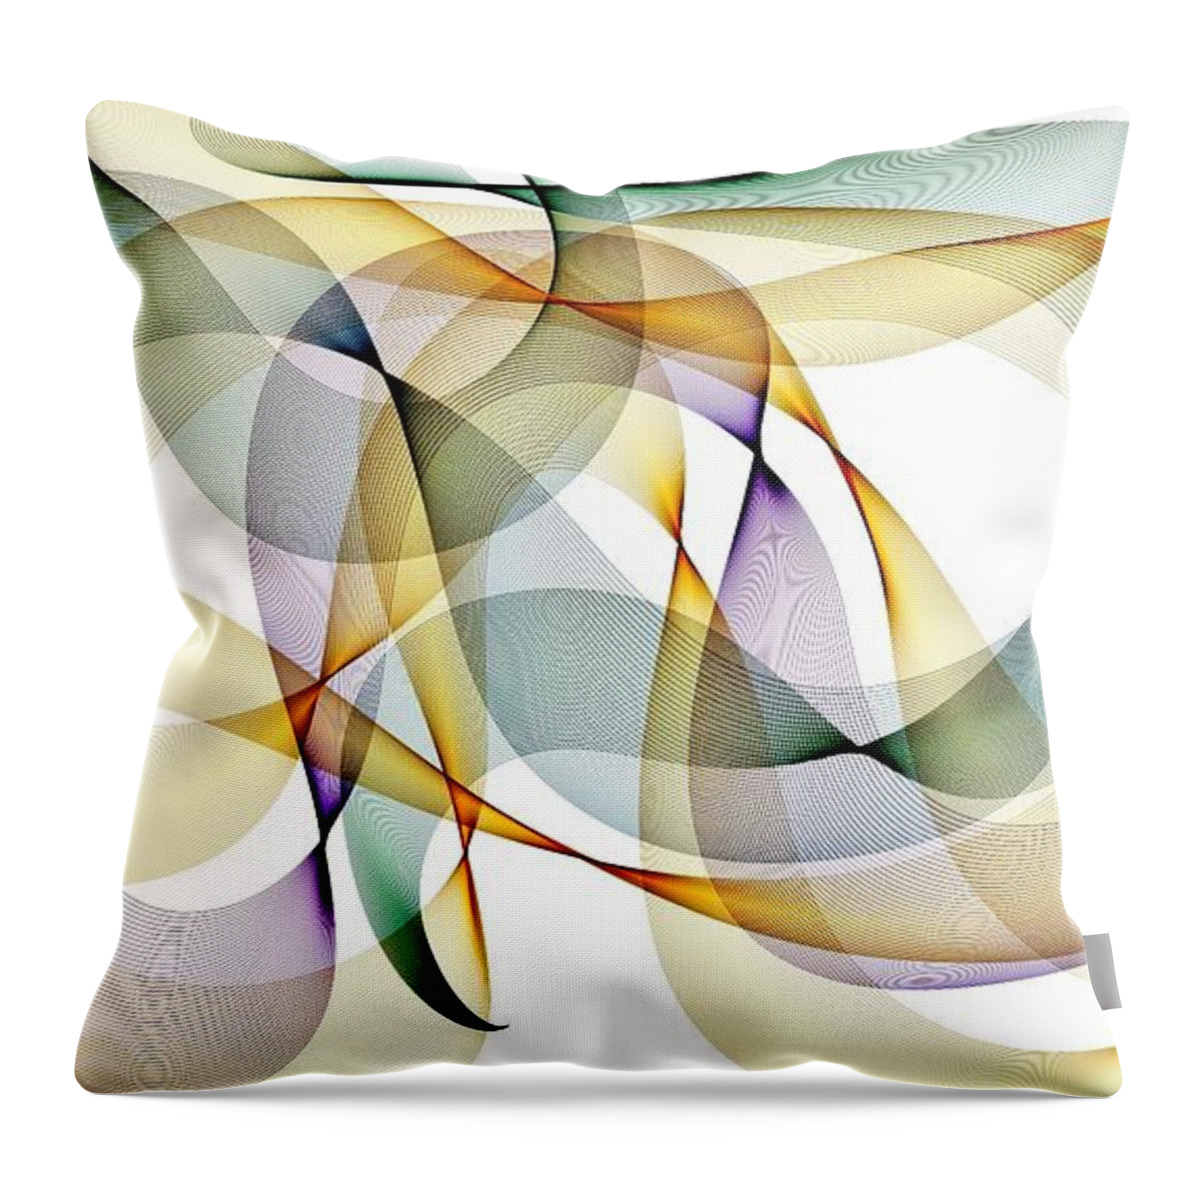 Breath Of Life Throw Pillow featuring the digital art Breath of Life by Marian Lonzetta